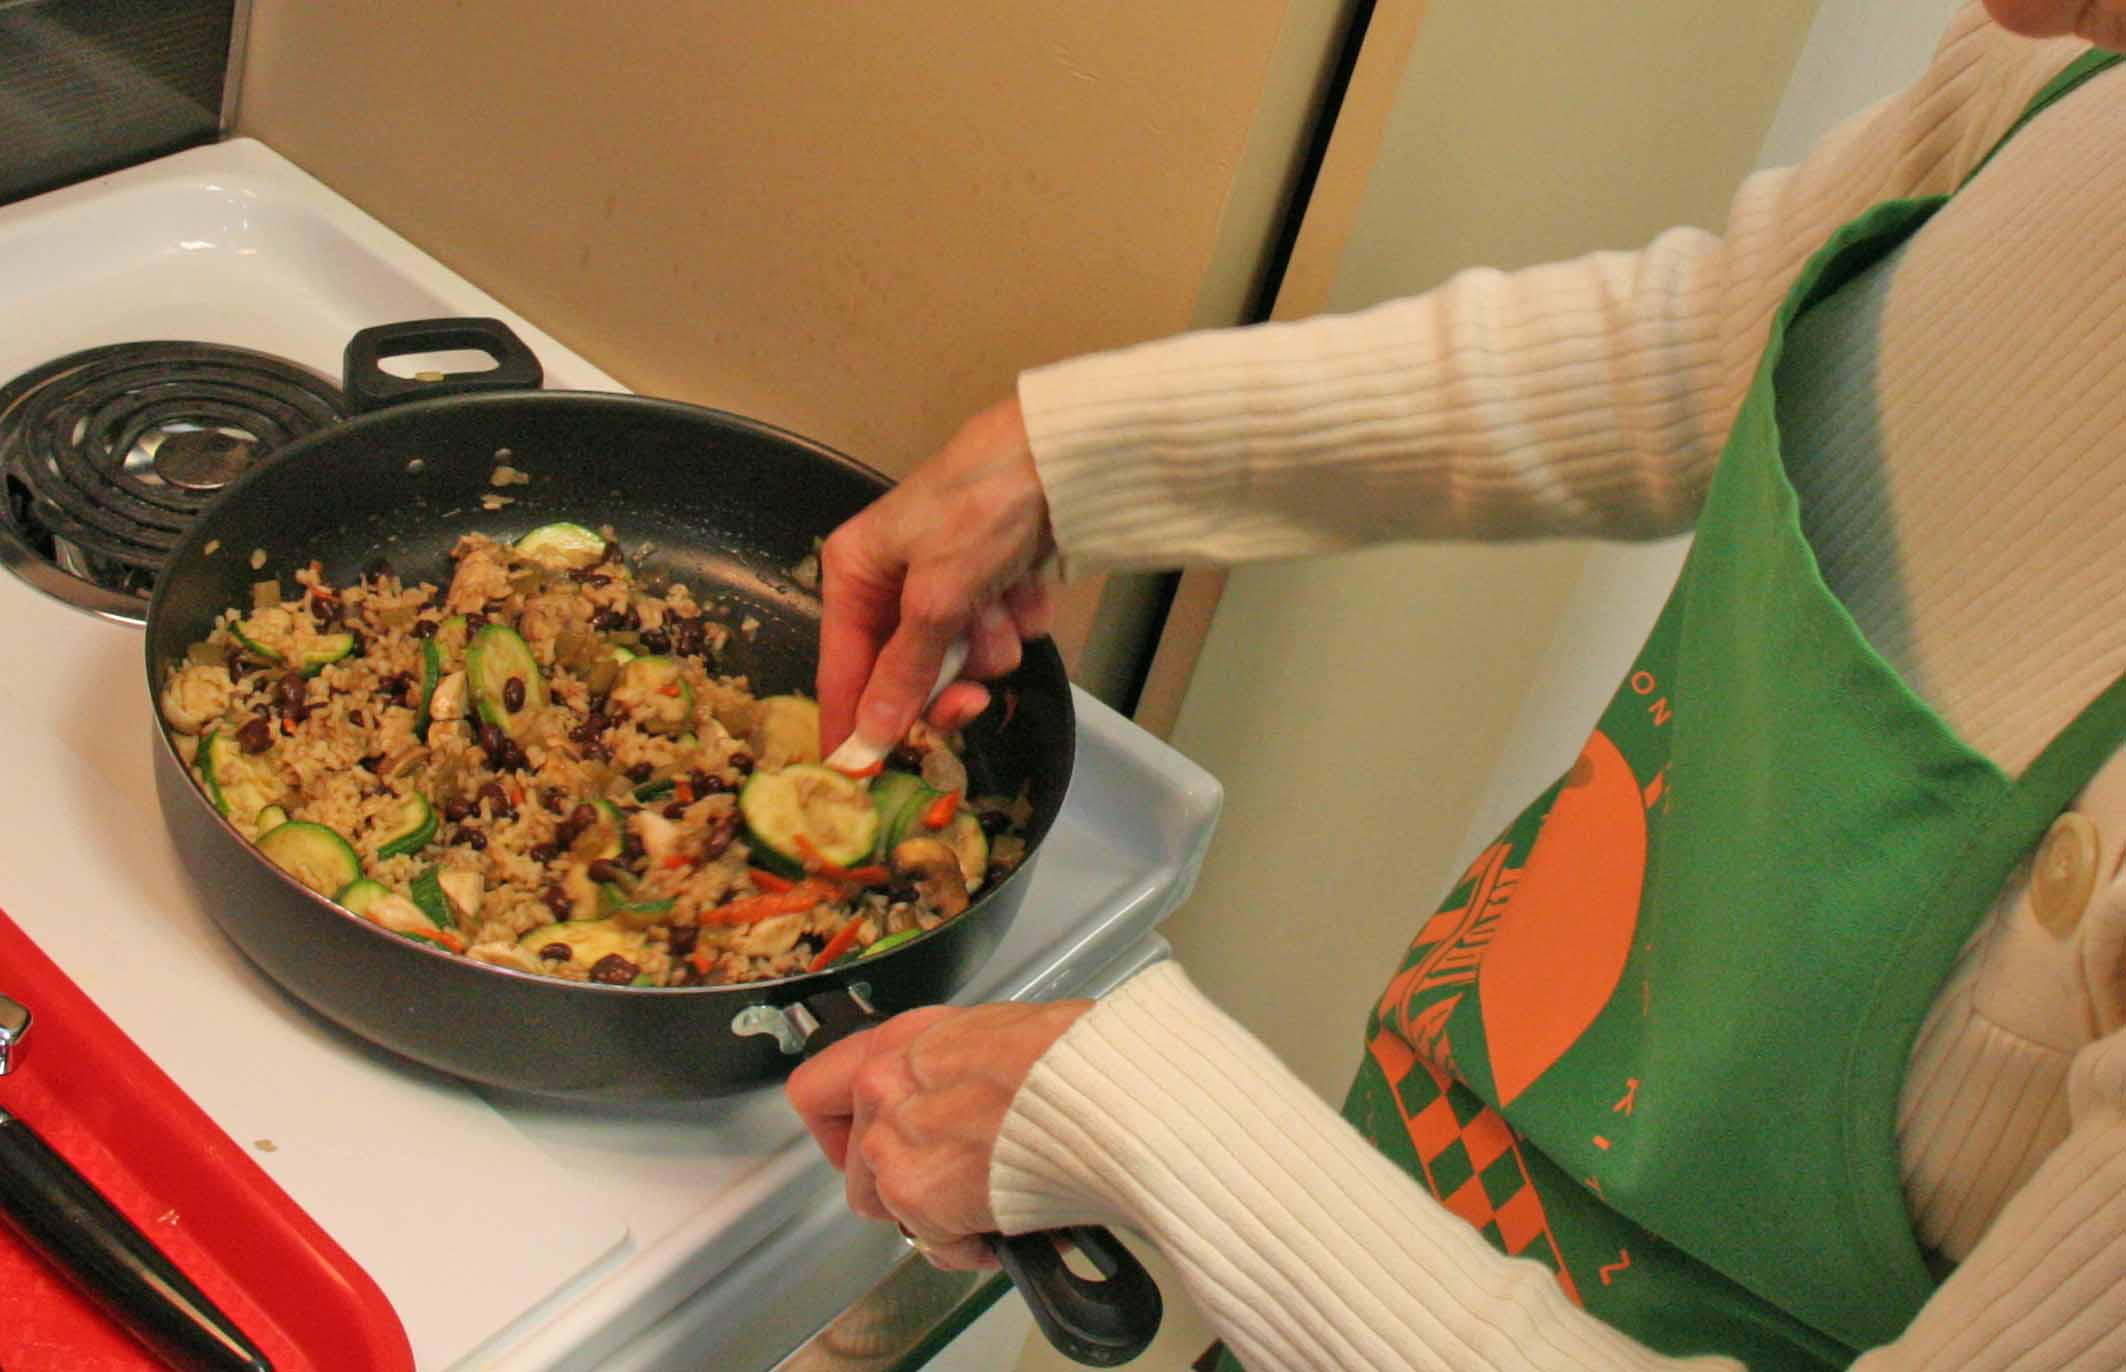 UGA Cooperative Extension has great ideas on how to prepare healthy, family-pleasing meals on a budget and is offering a cooking class for busy families July 18 at Rock Eagle 4-H Center.